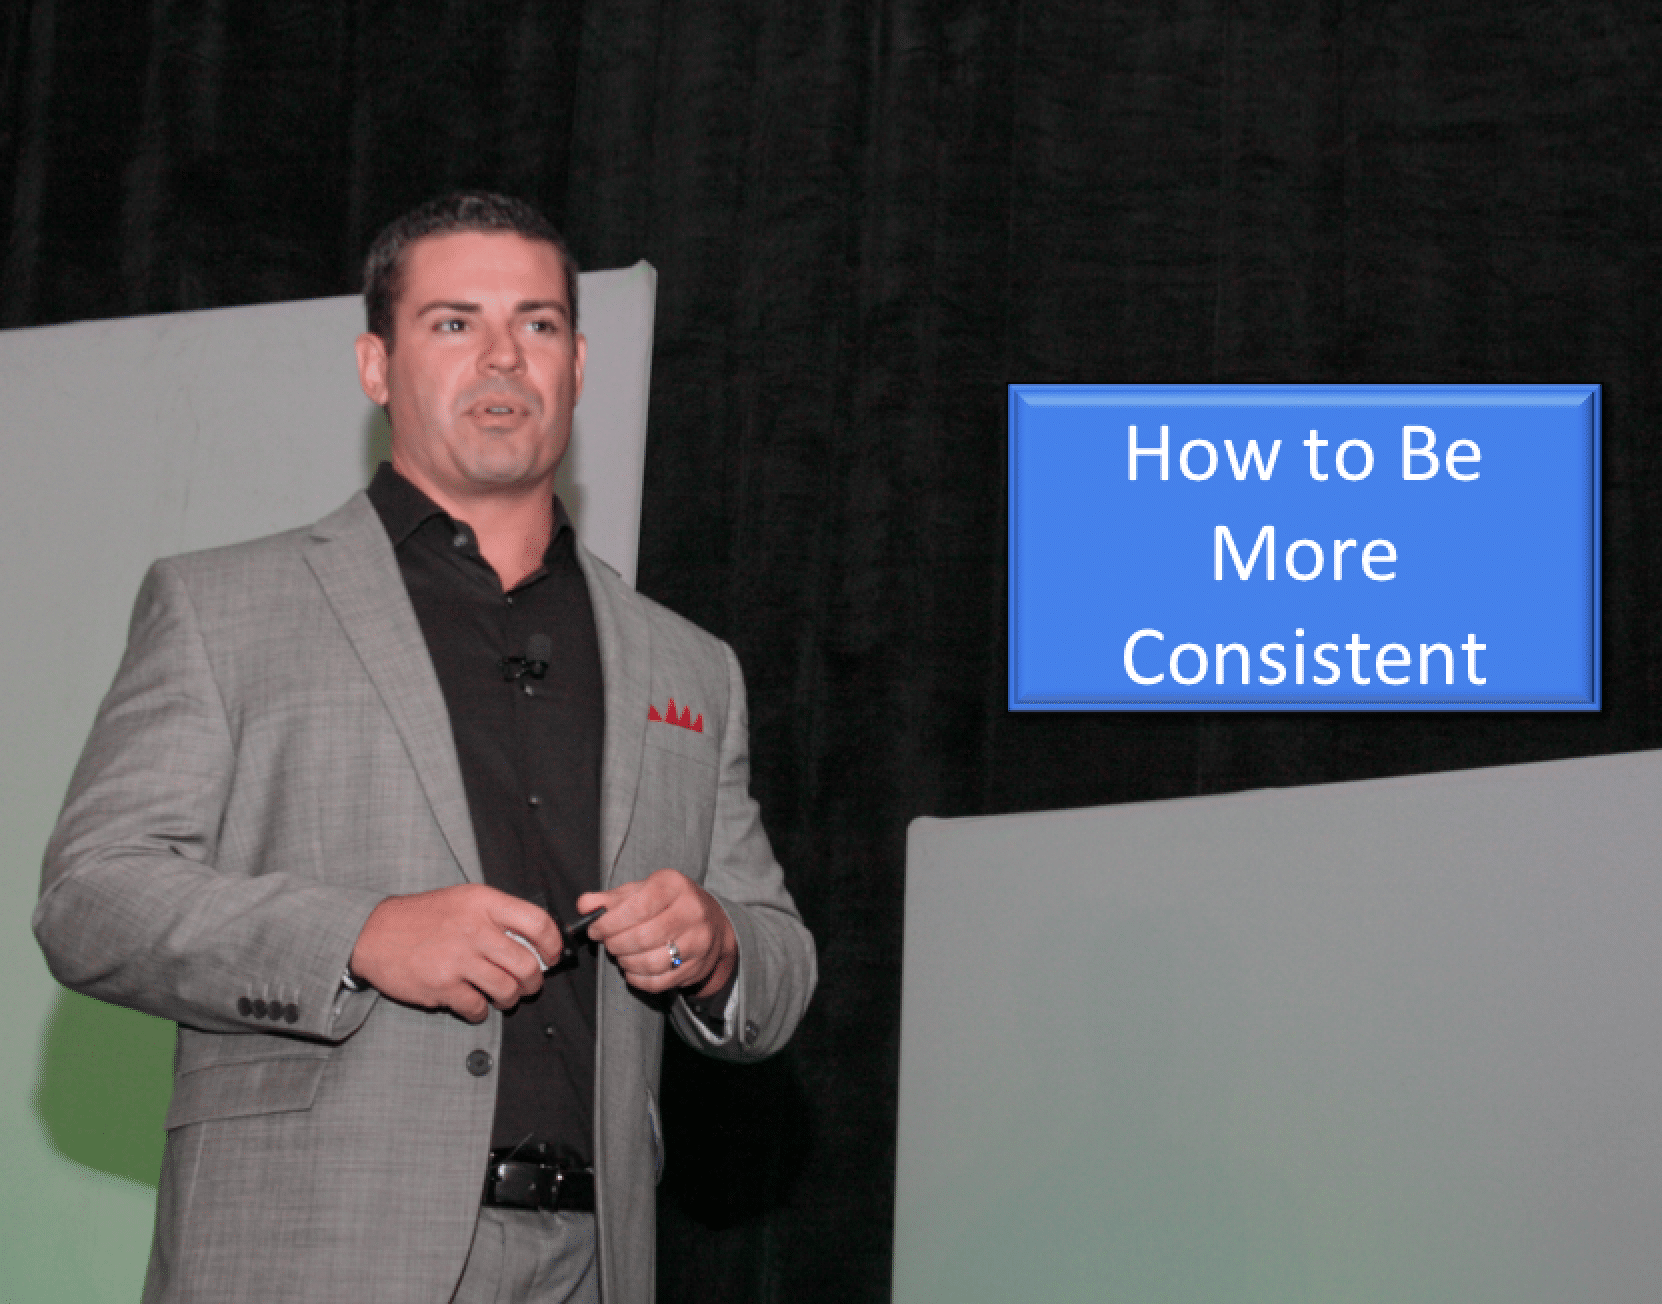 How to Be More Consistent